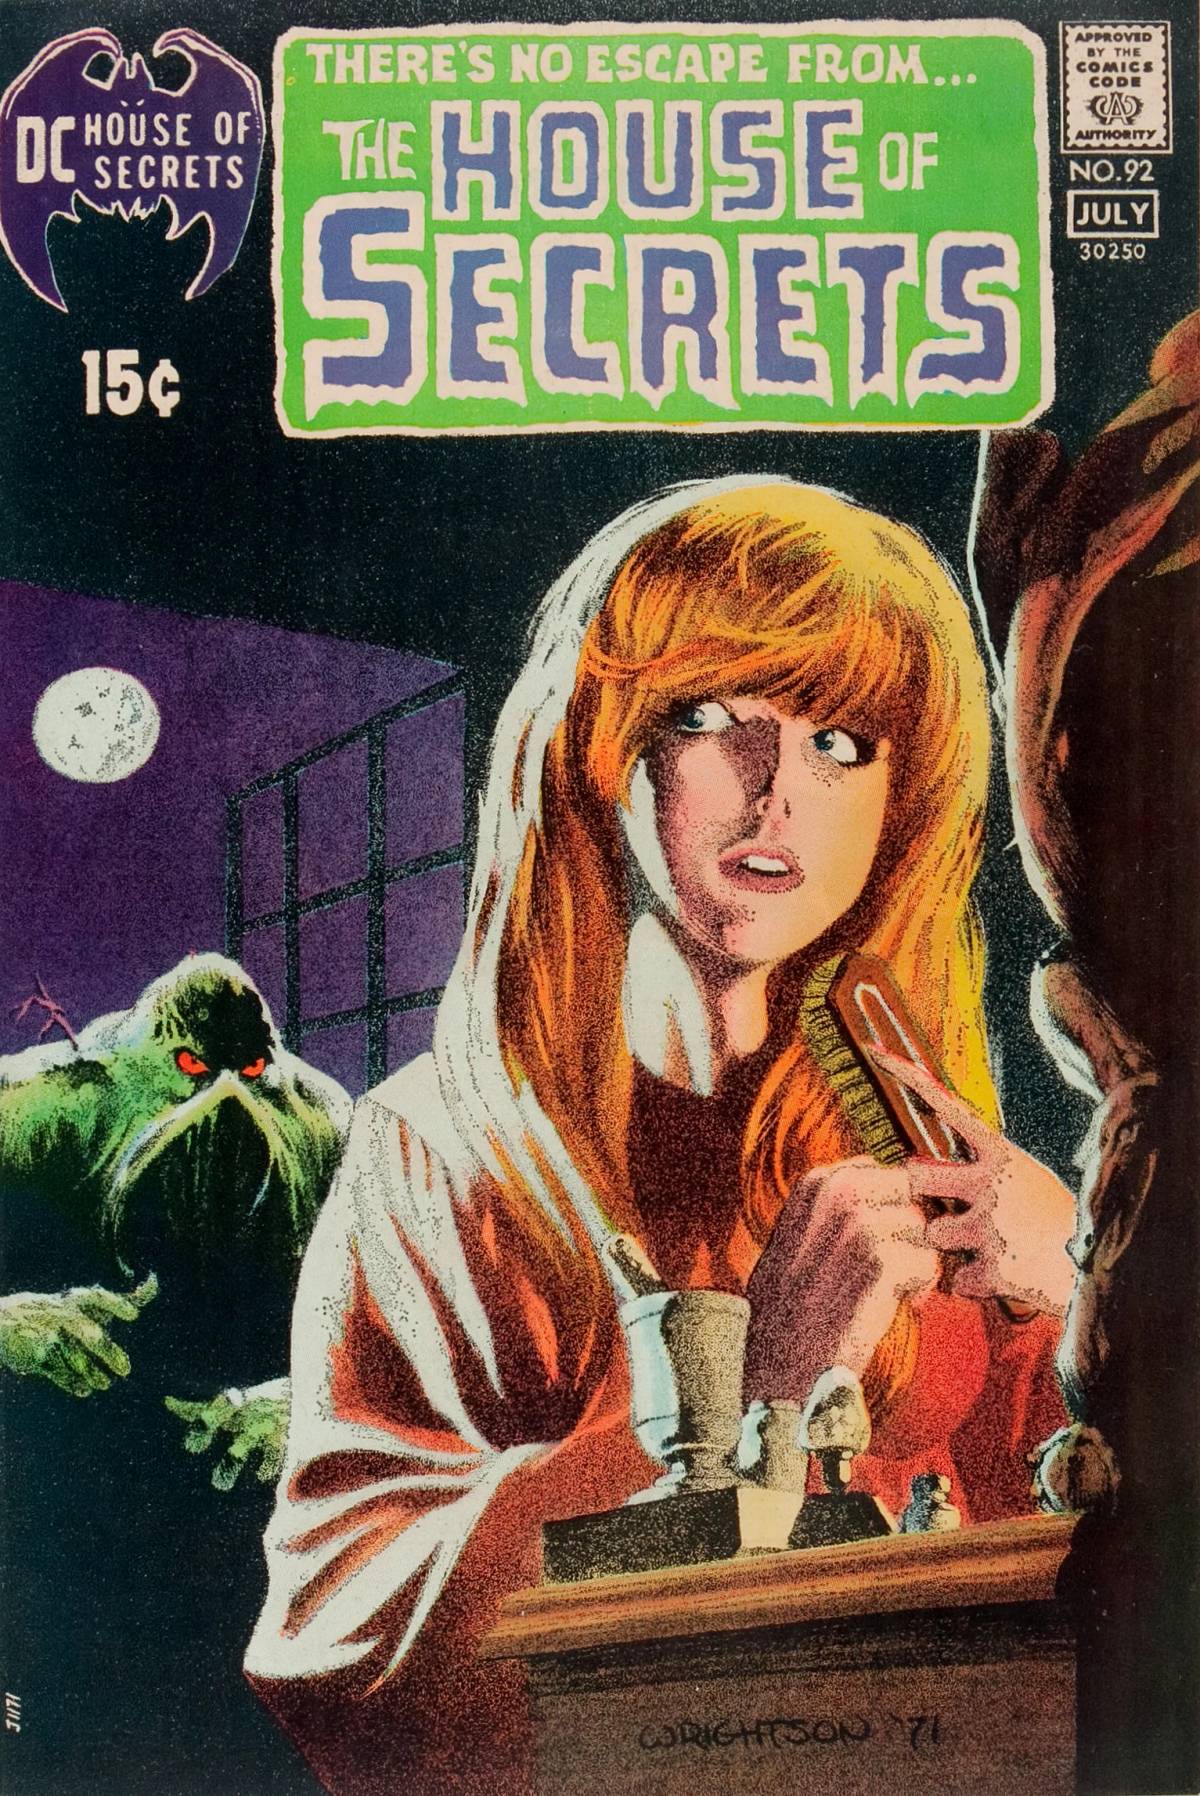  The Swamp Thing appears in a 1971 issue of 'The House of Secrets'